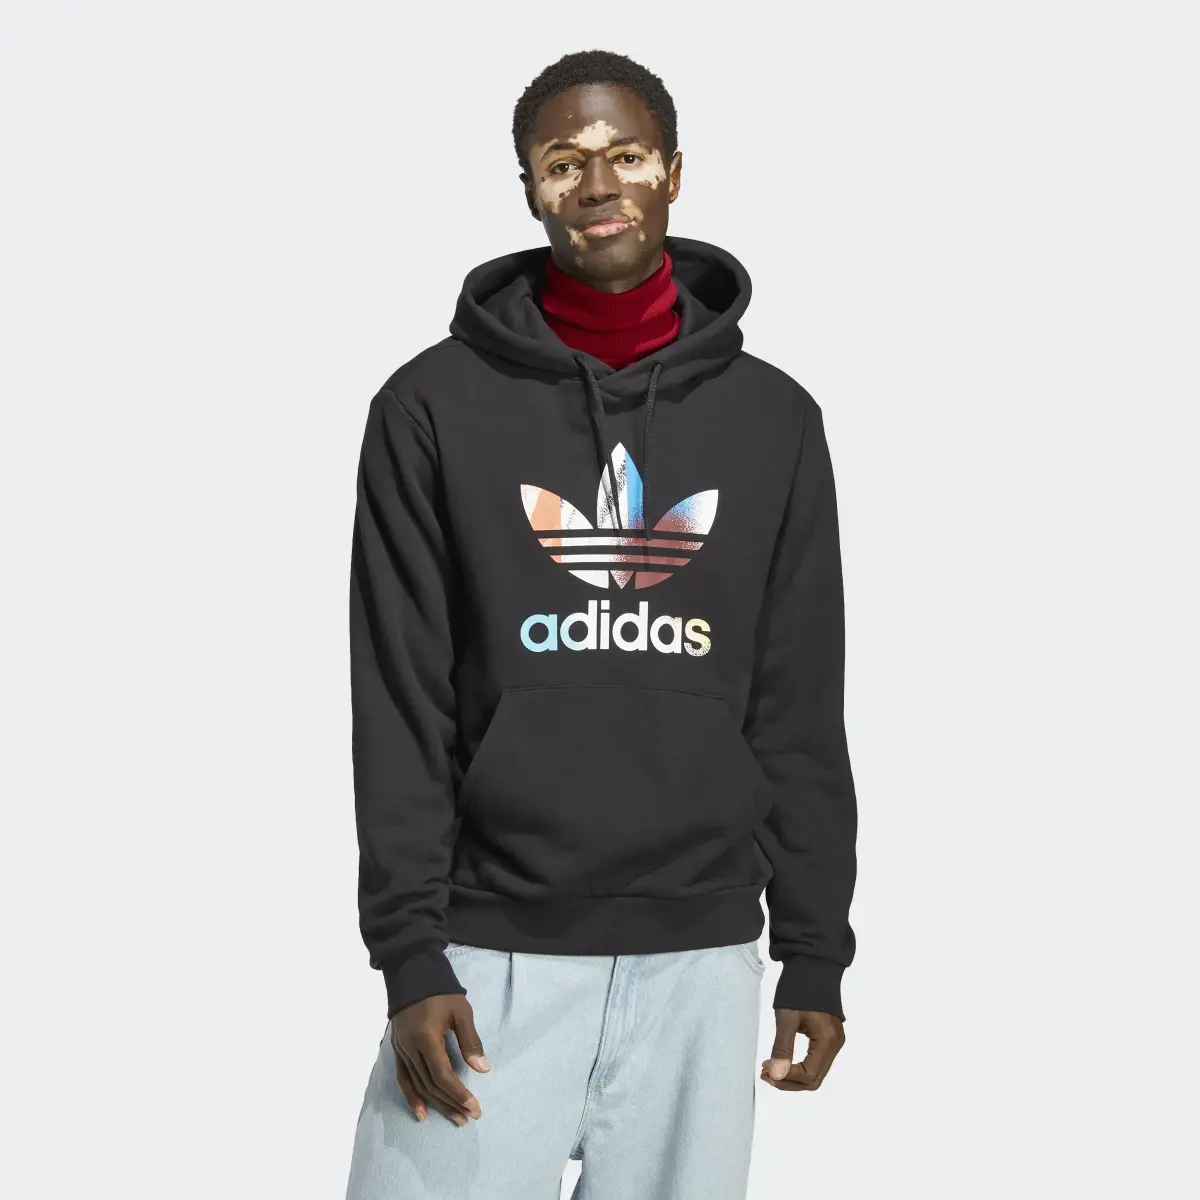 Adidas Hoodie Graphics off the Grid. 2